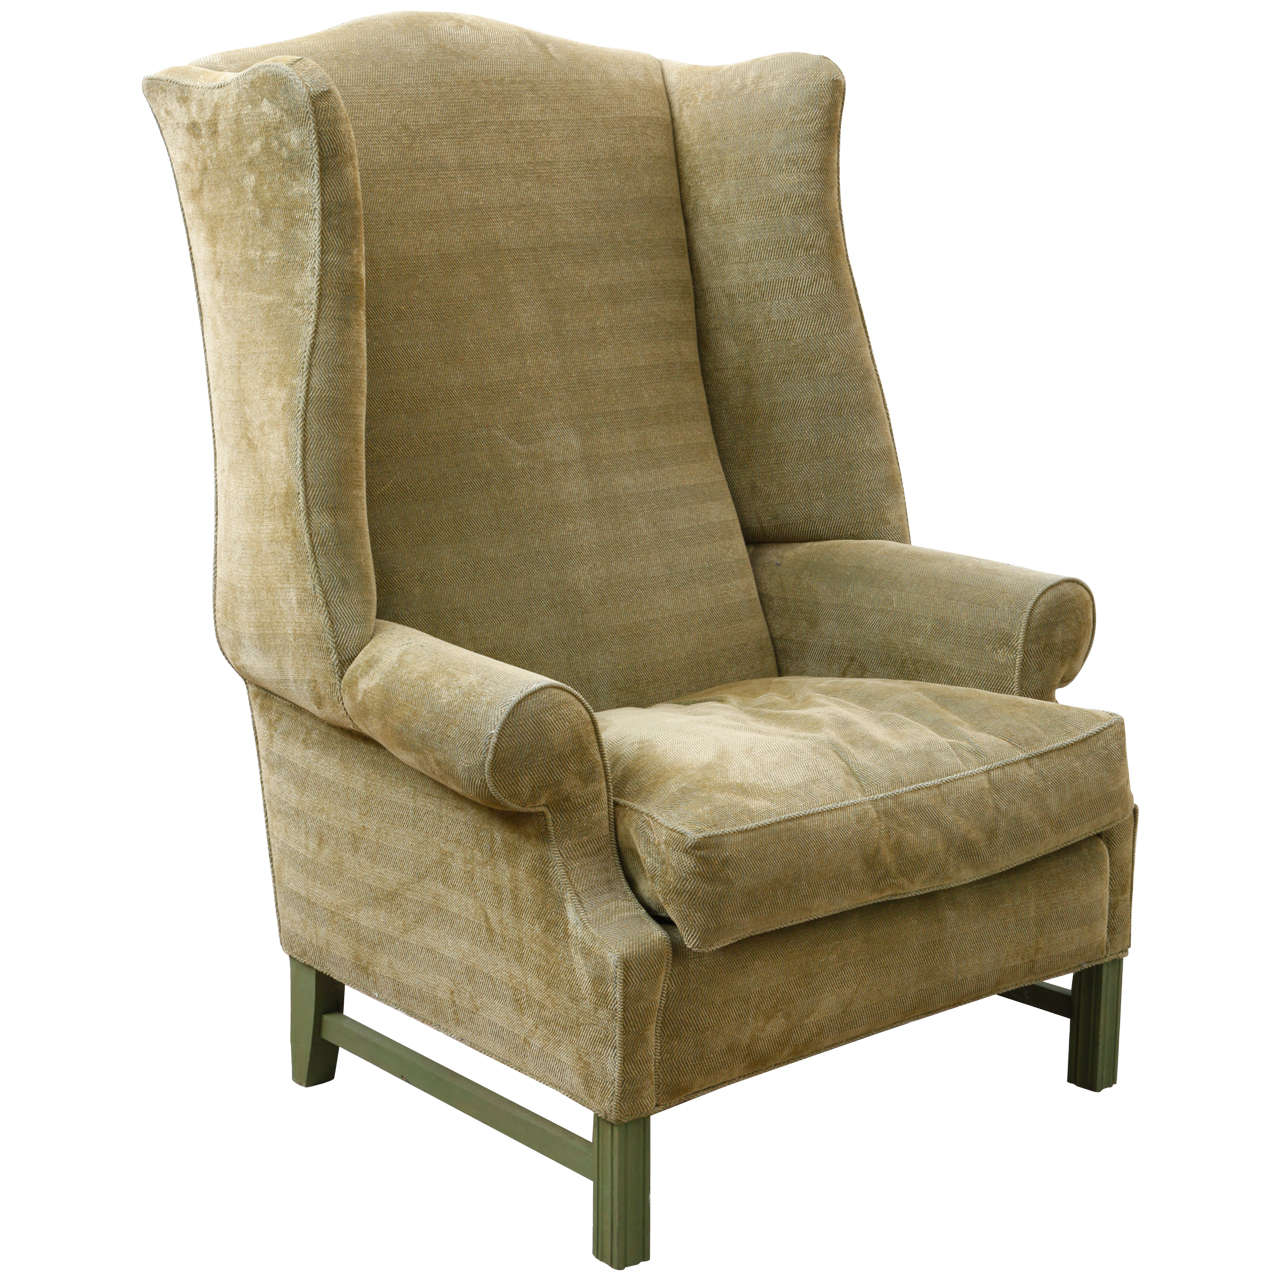 Green Painted Oversized English Wingback Armchair For Sale